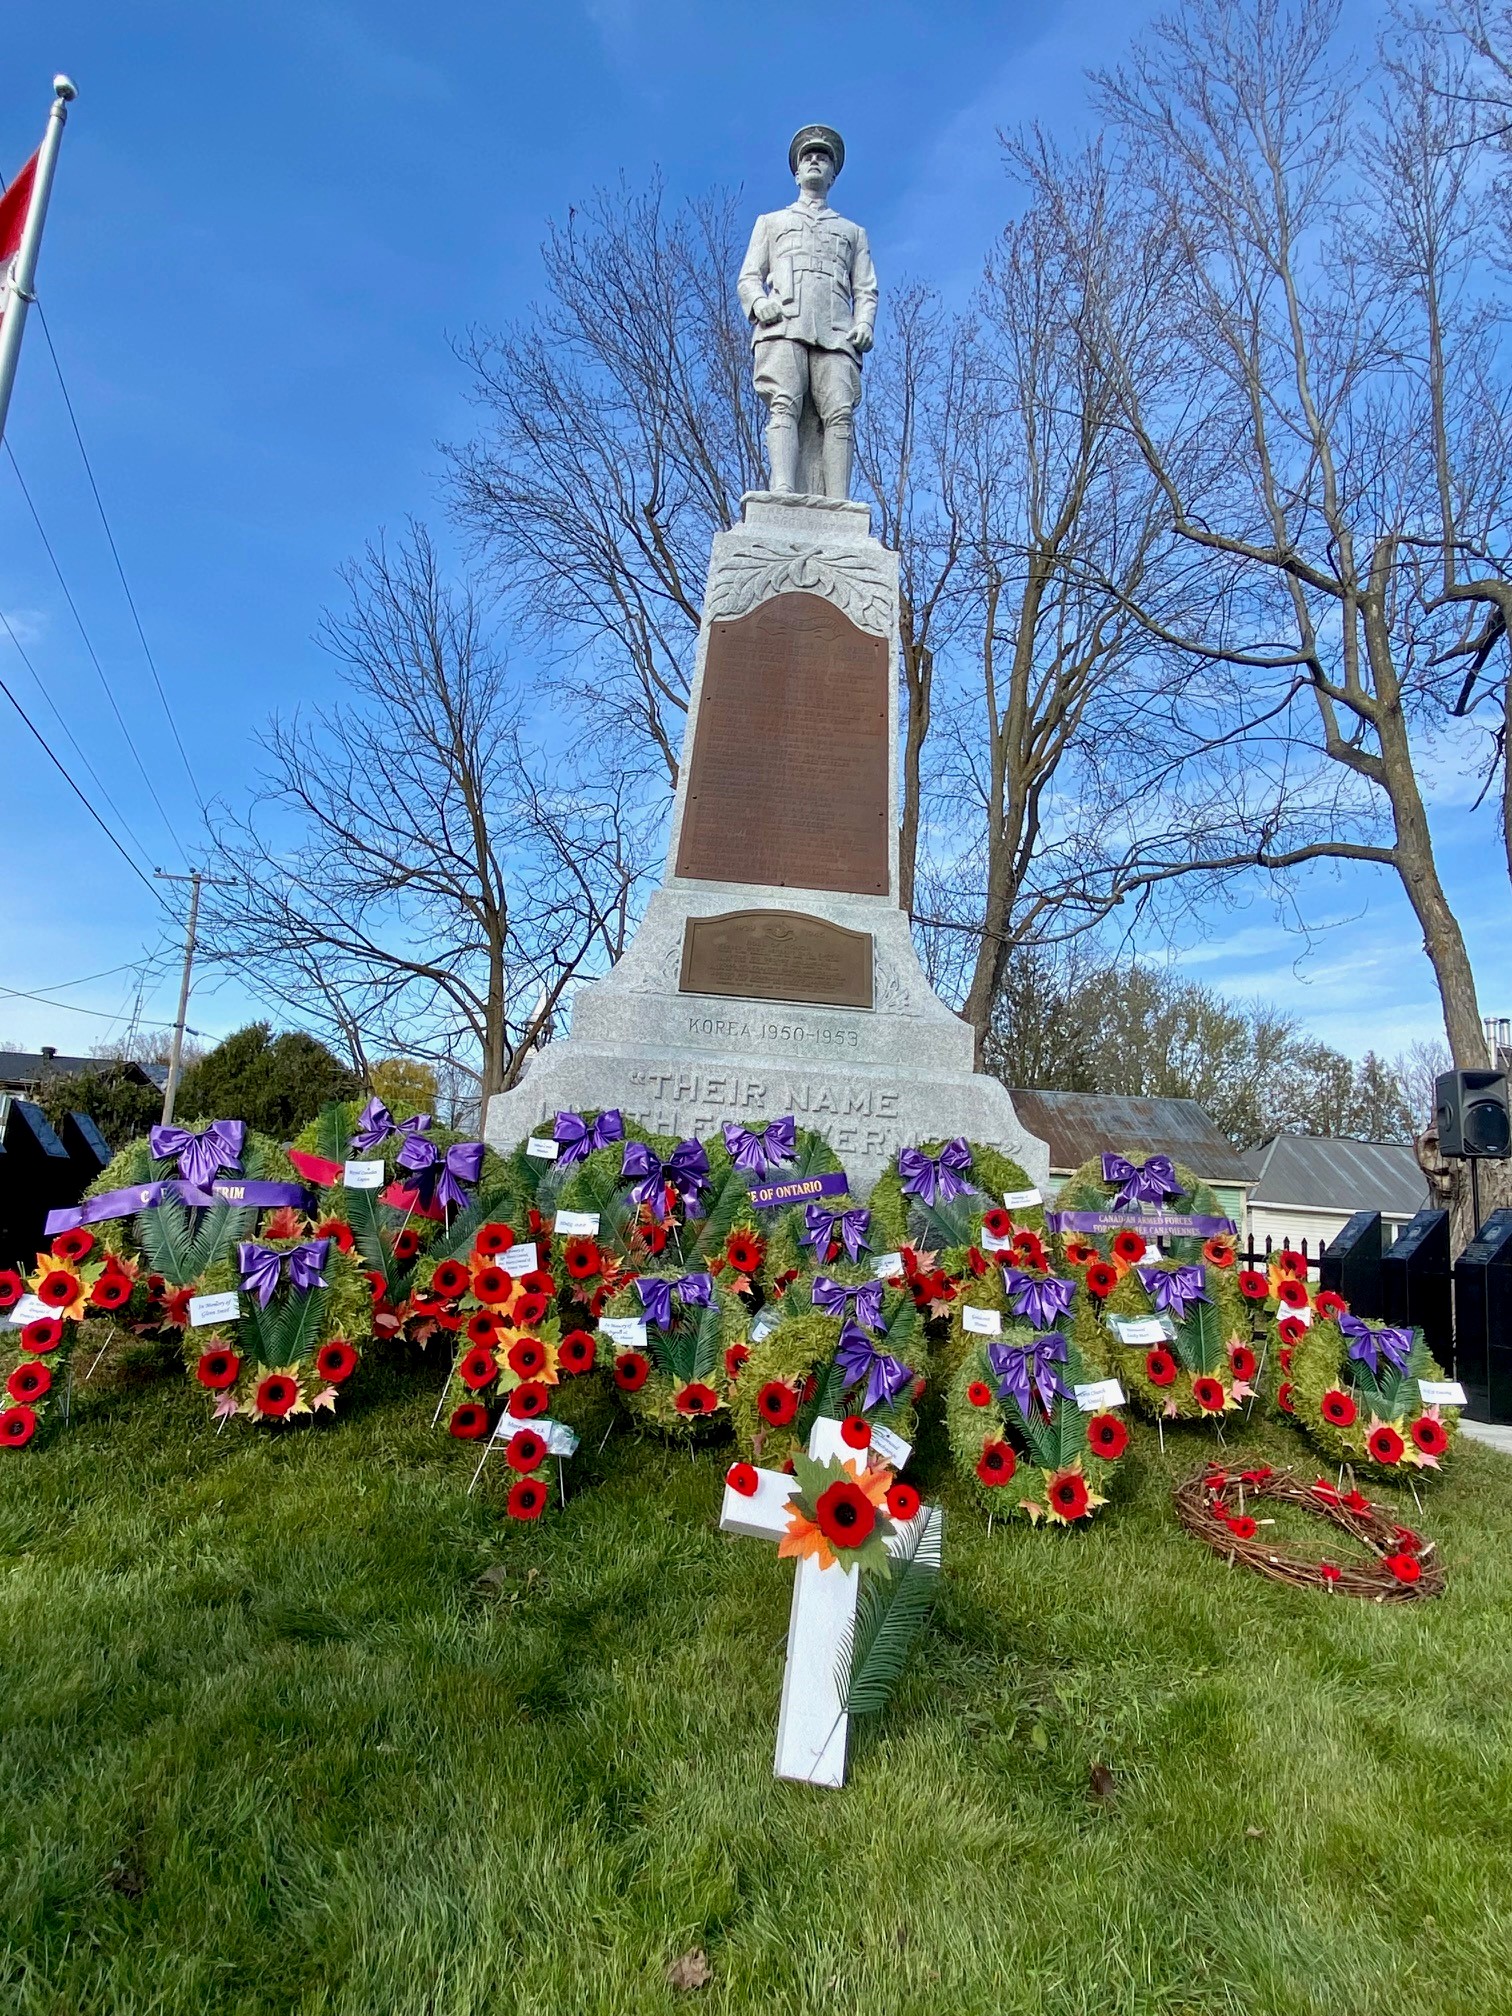 The wreaths in front of the Morewood Cenotaph